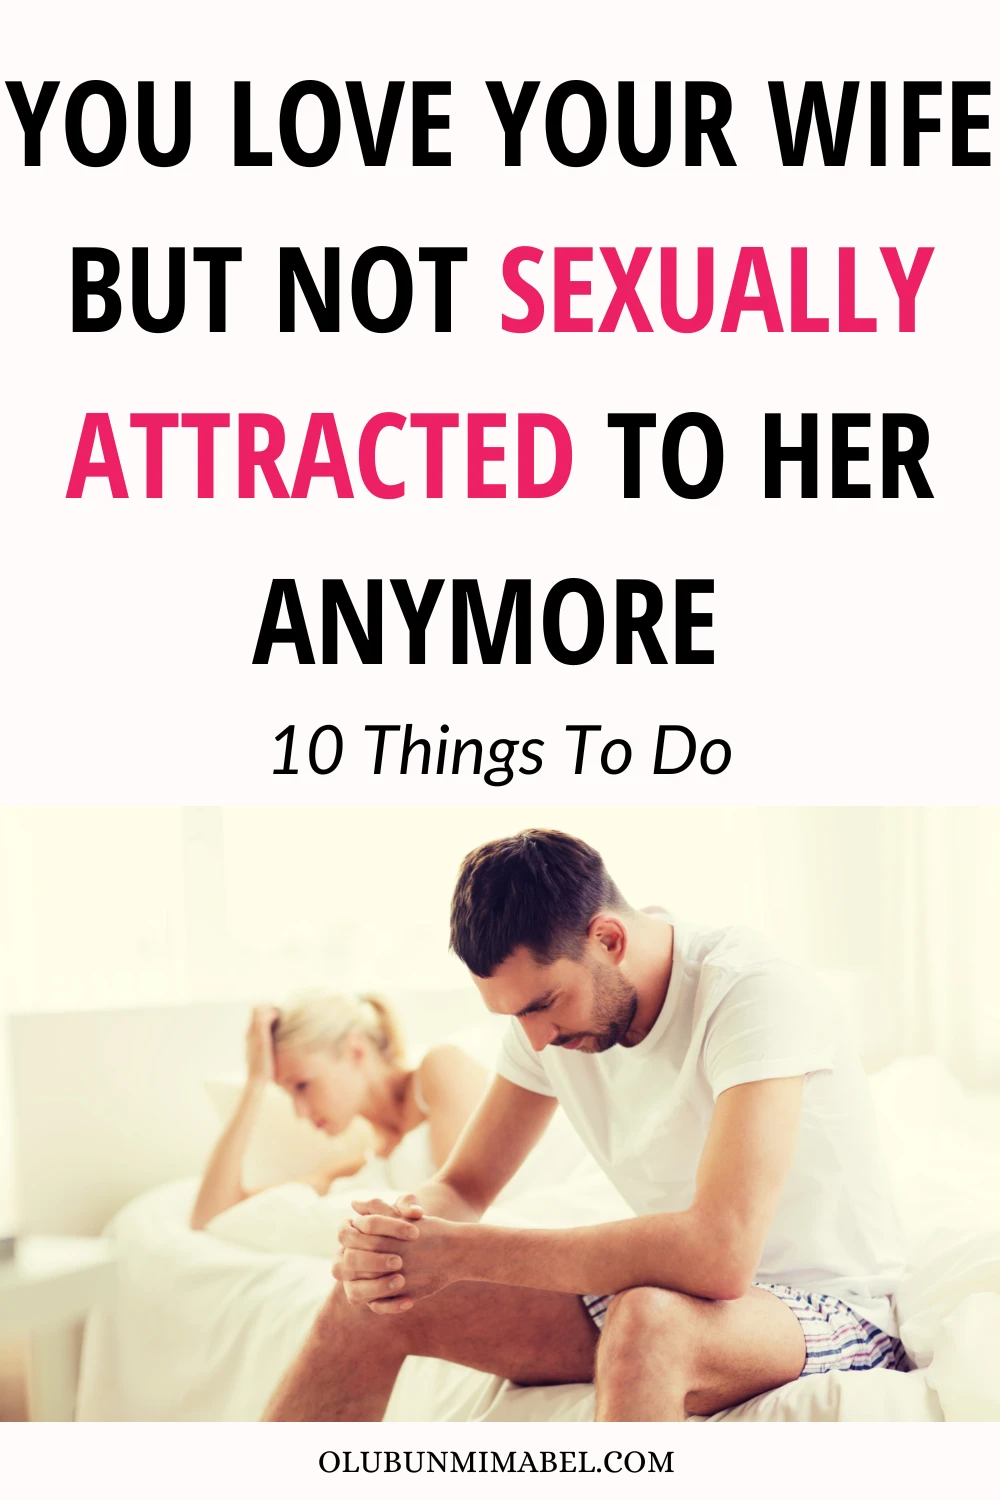 I love My Wife But Not Sexually Attracted To Her